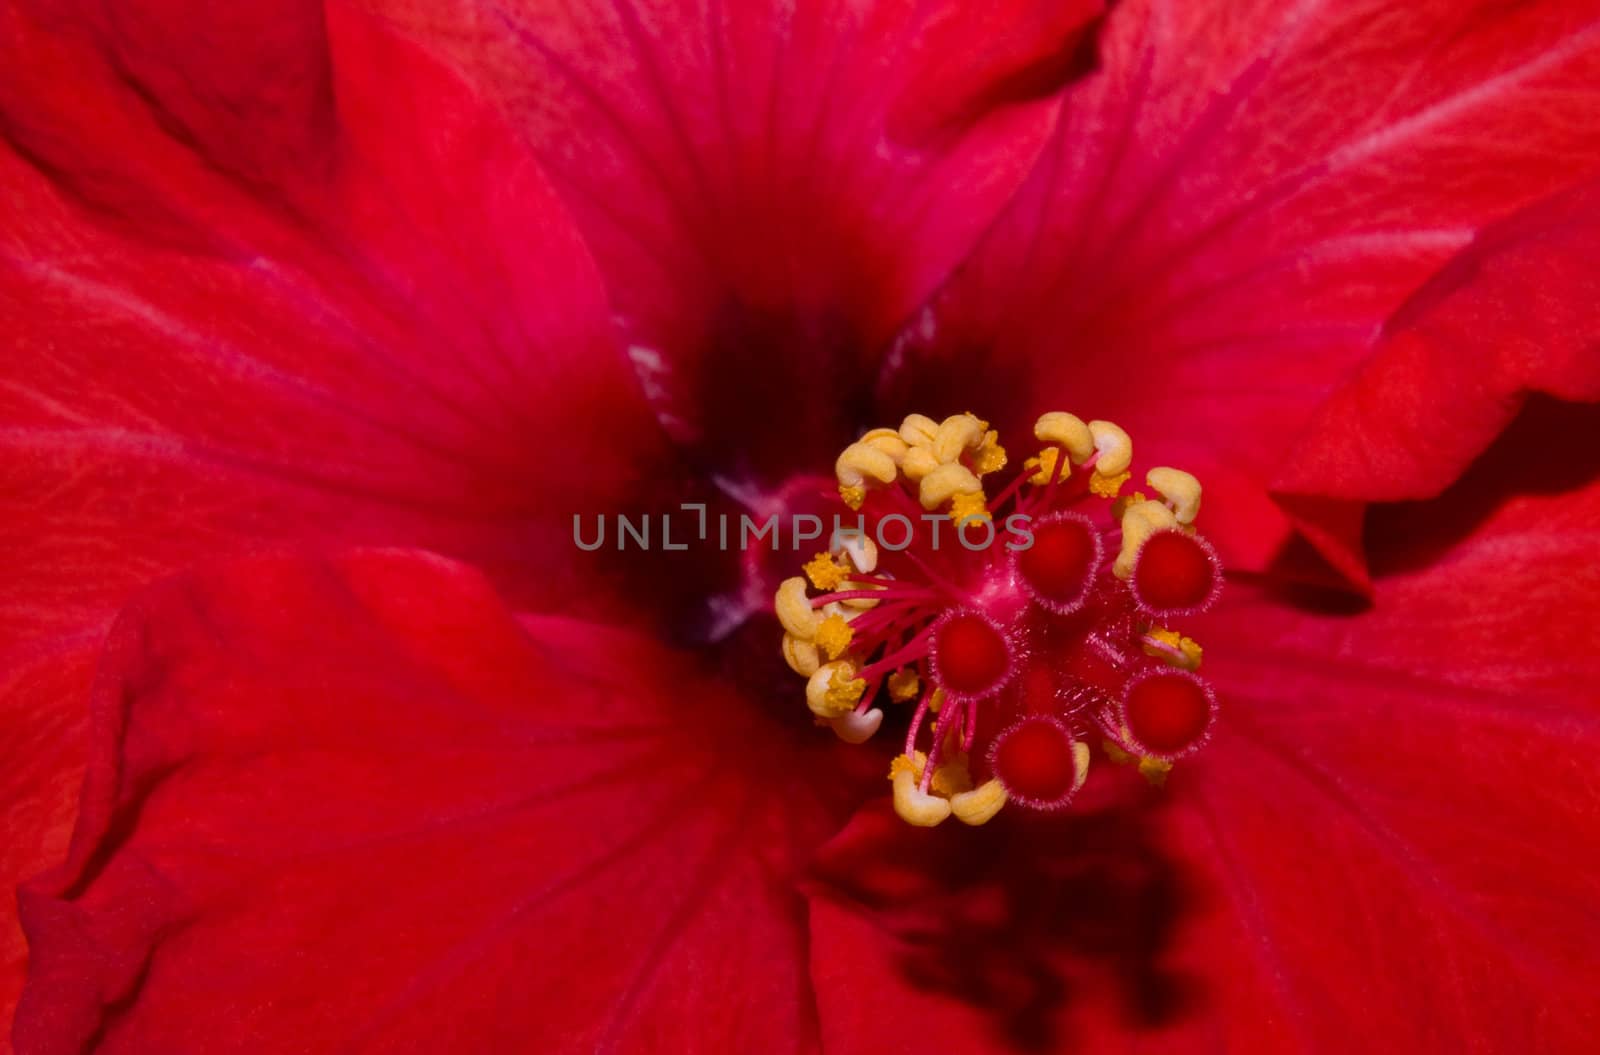 extreme close up of a red hibiscus with stamen visible
